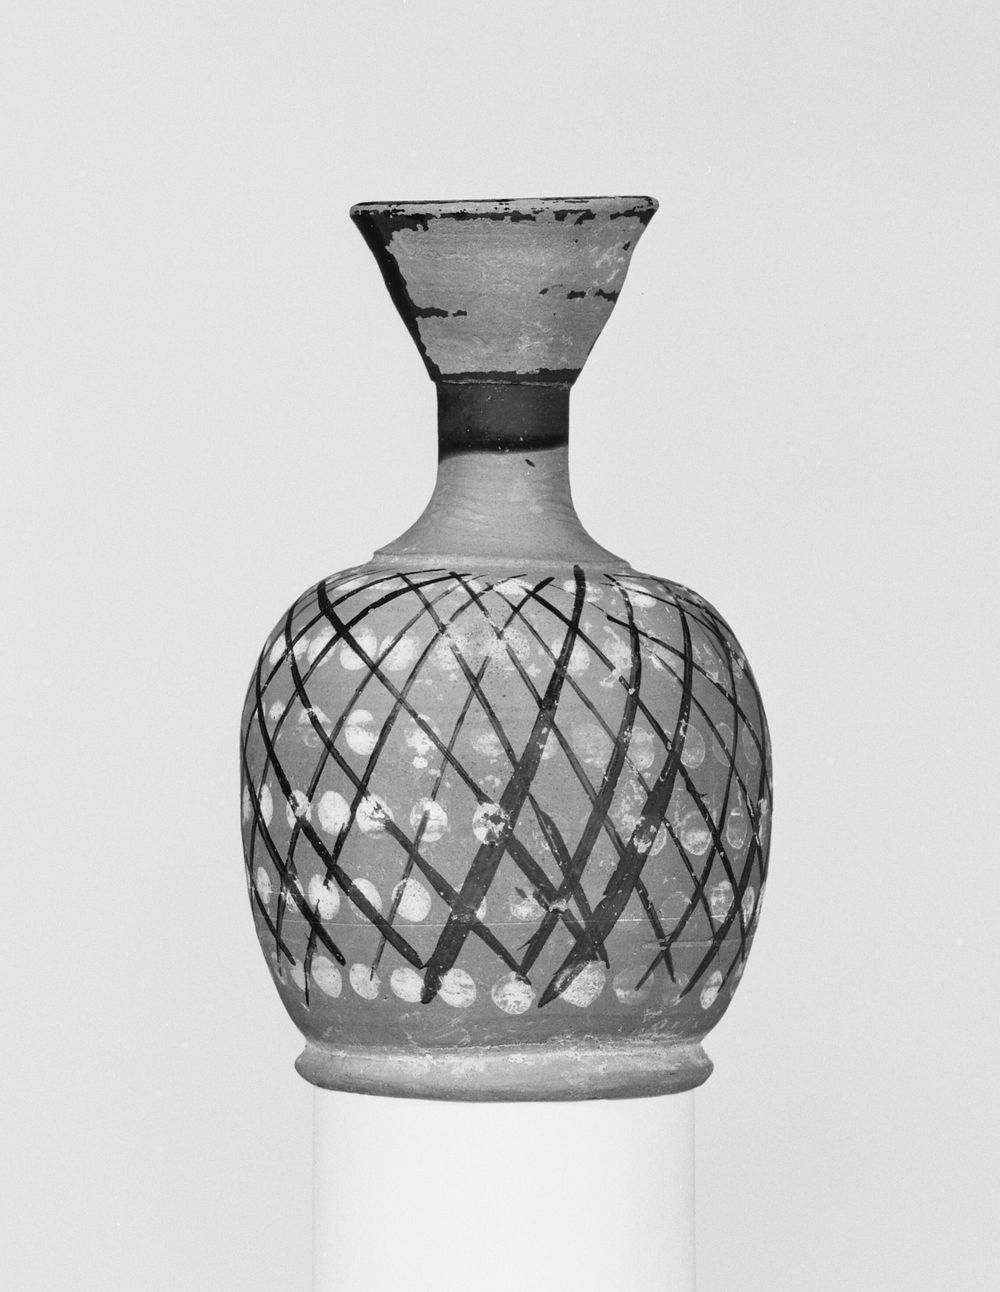 Attic Squat Lekythos with Network Pattern by Bulas Group